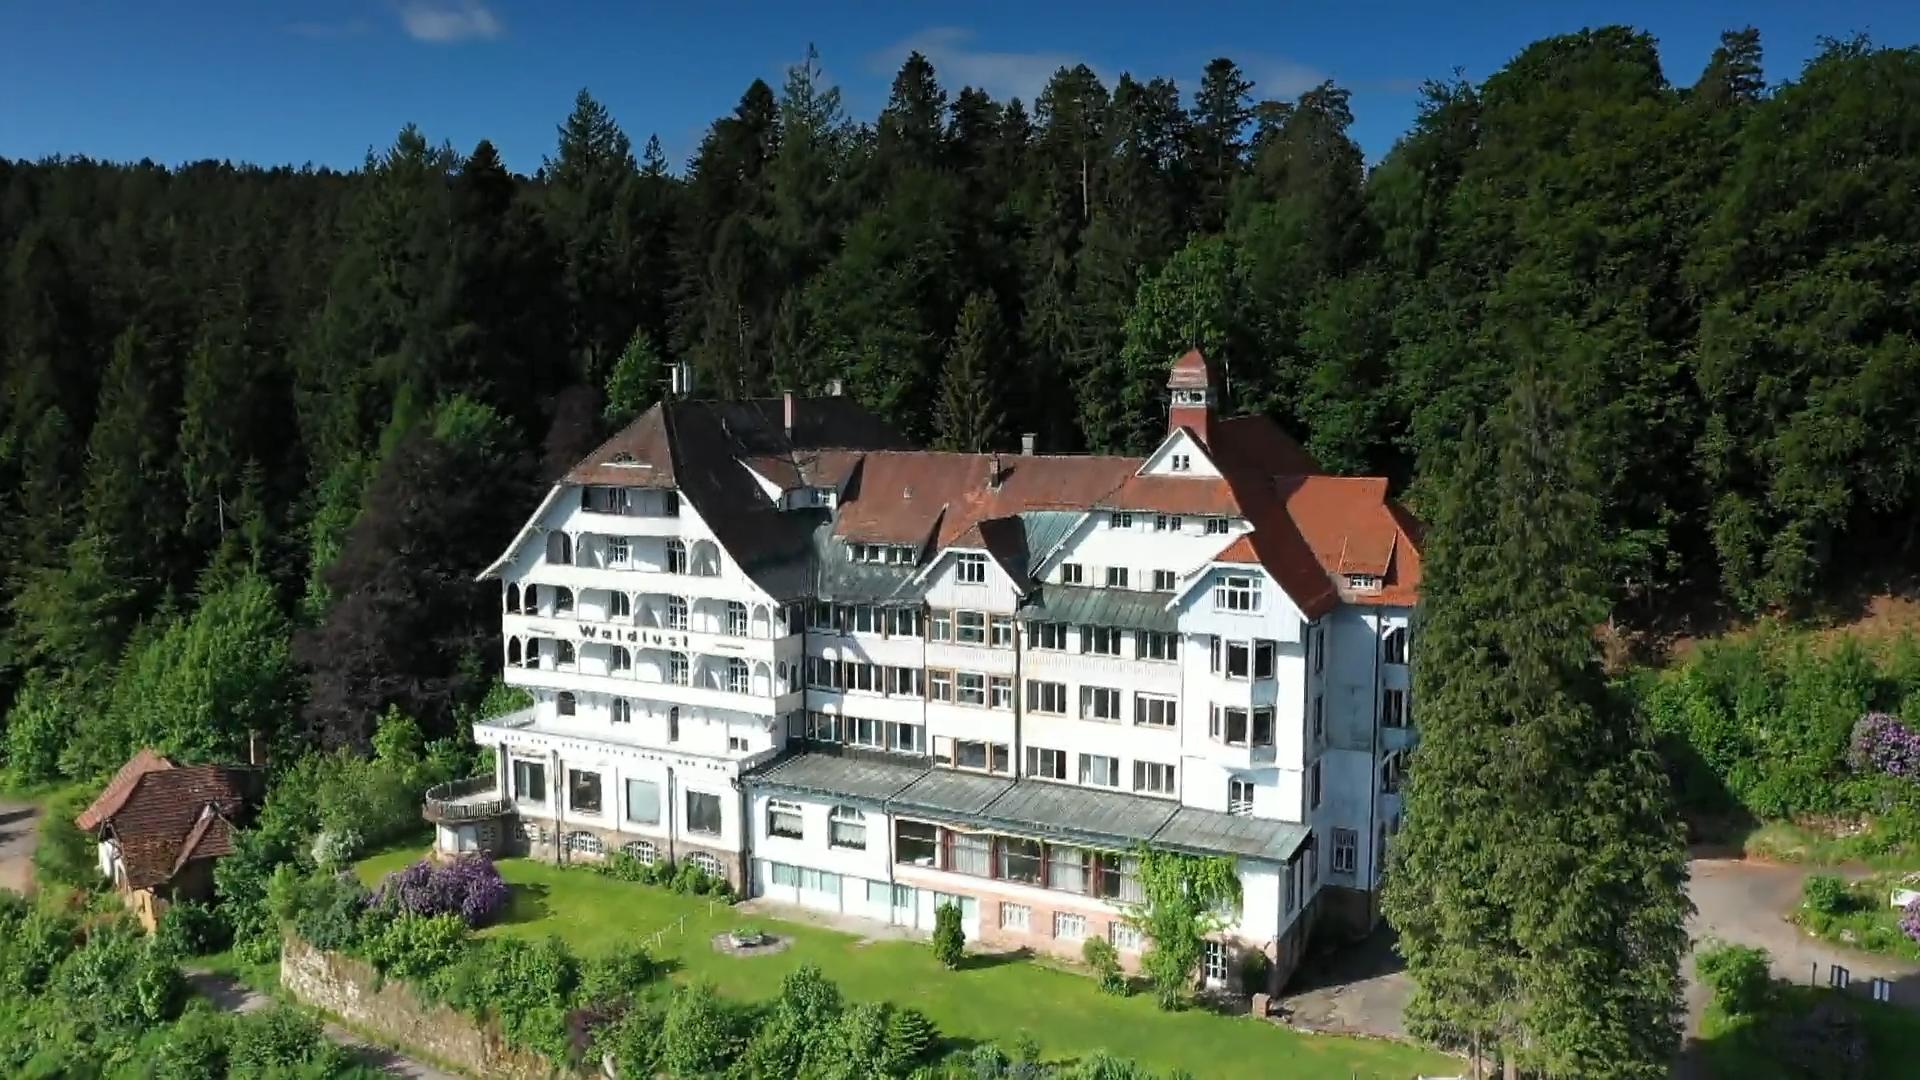 Lost Place Hotels in Germany Save & Save Hotels